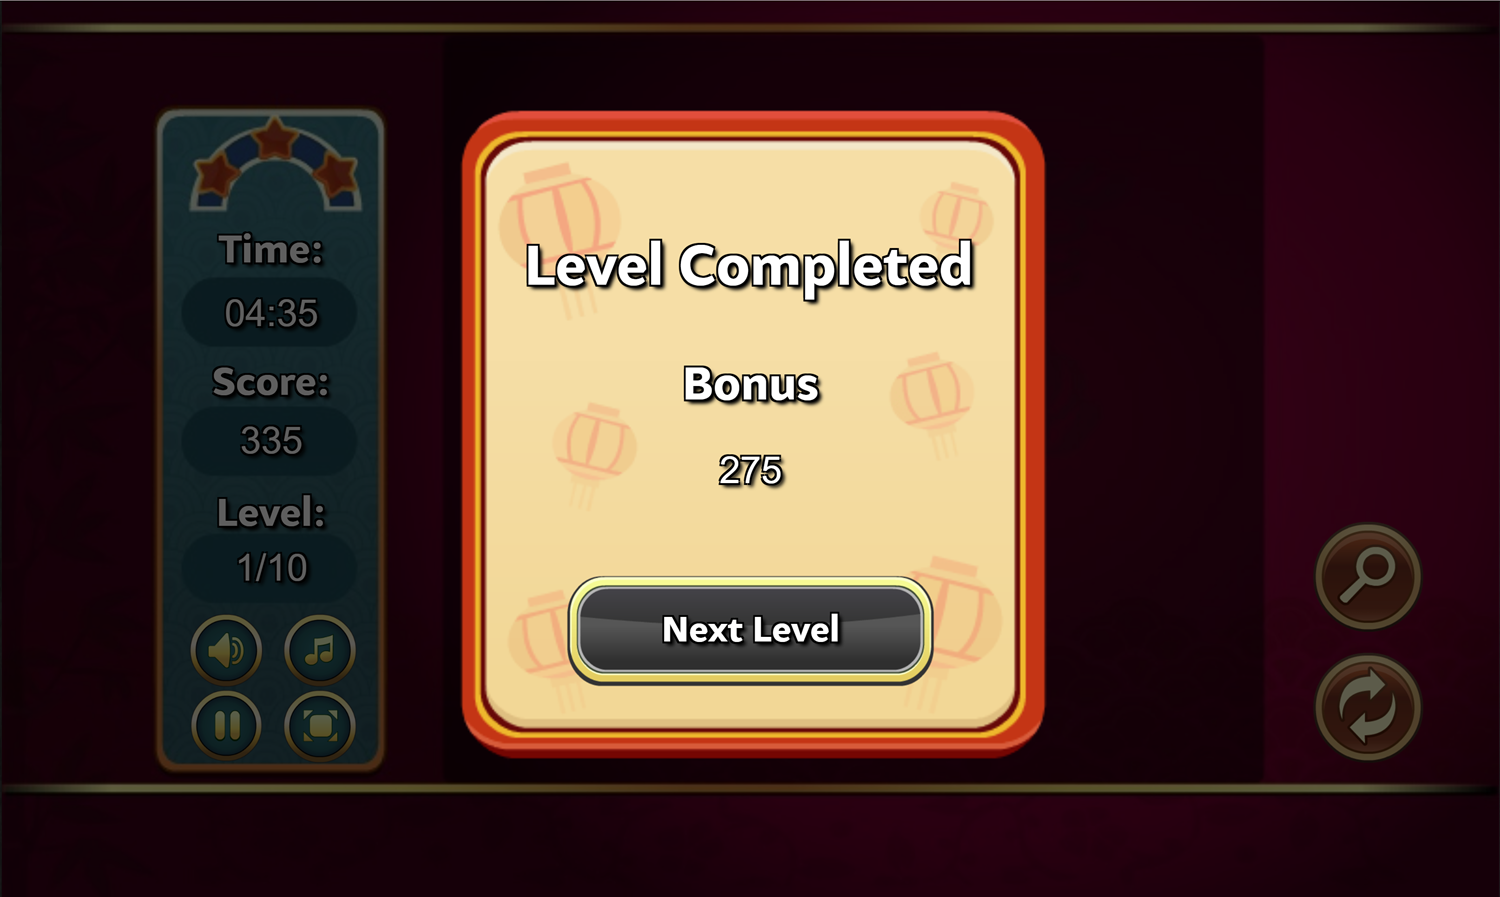 Triple Connect Game Level Completed Screen Screenshot.